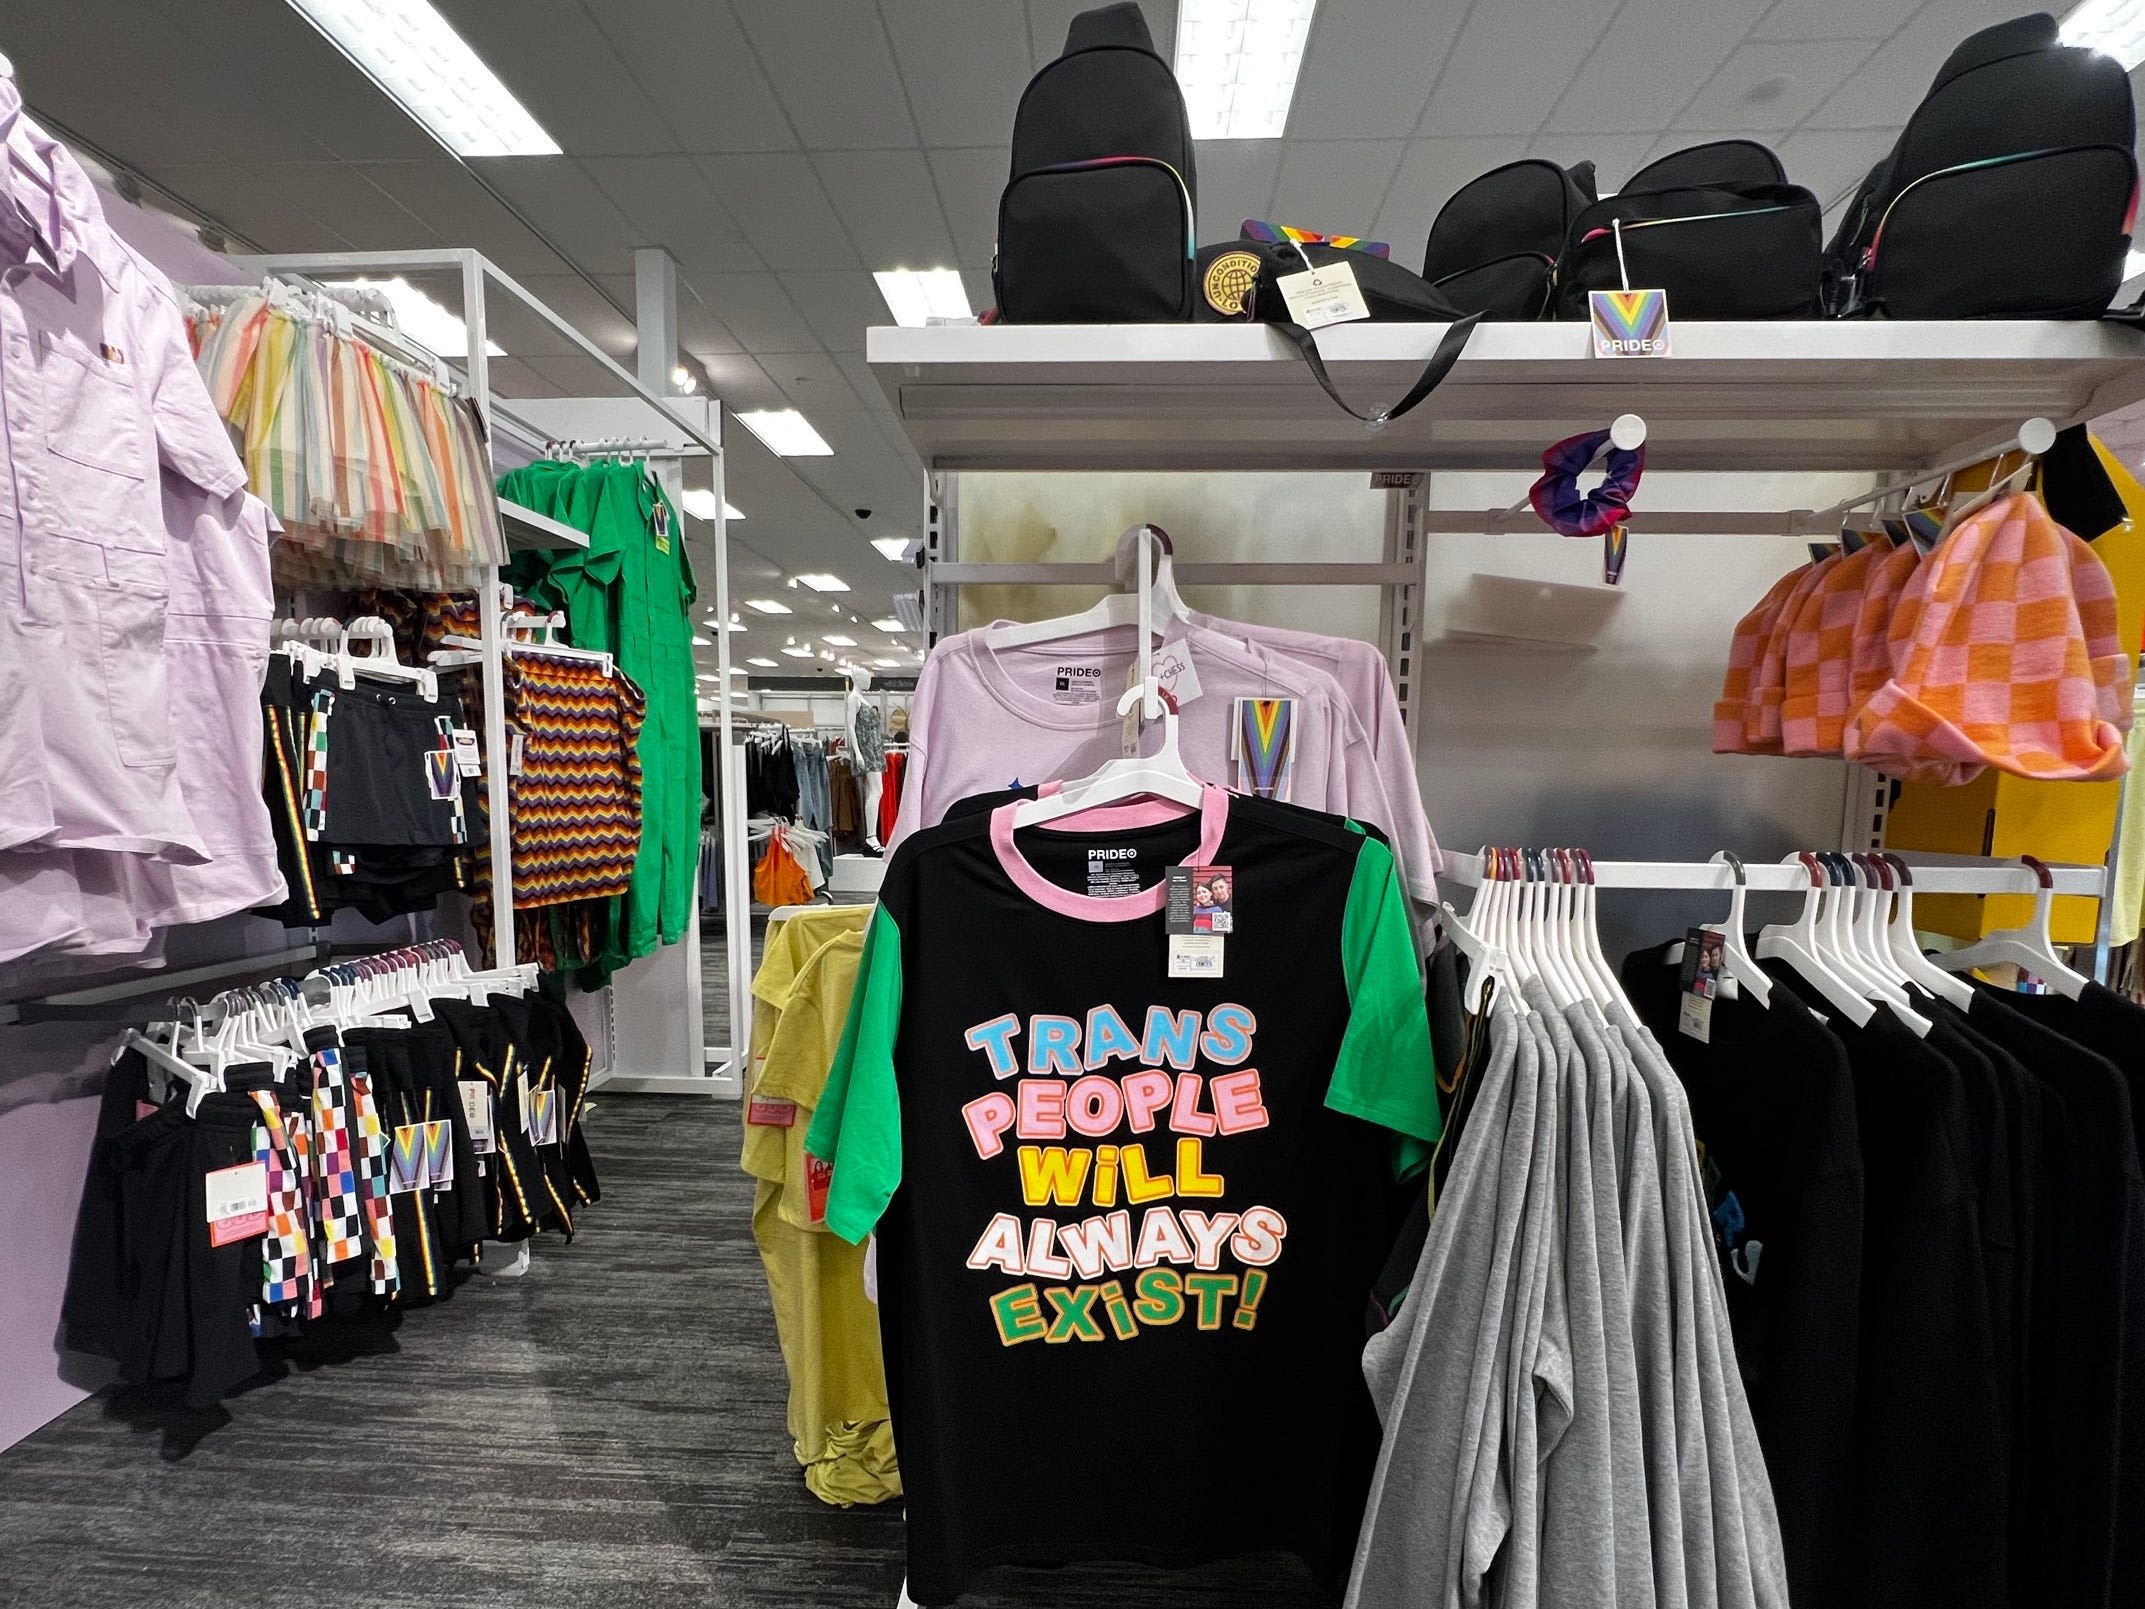 Target slashed this year's Pride collection after last year's backlash, leaving some LGBTQ+ insiders feeling alienated